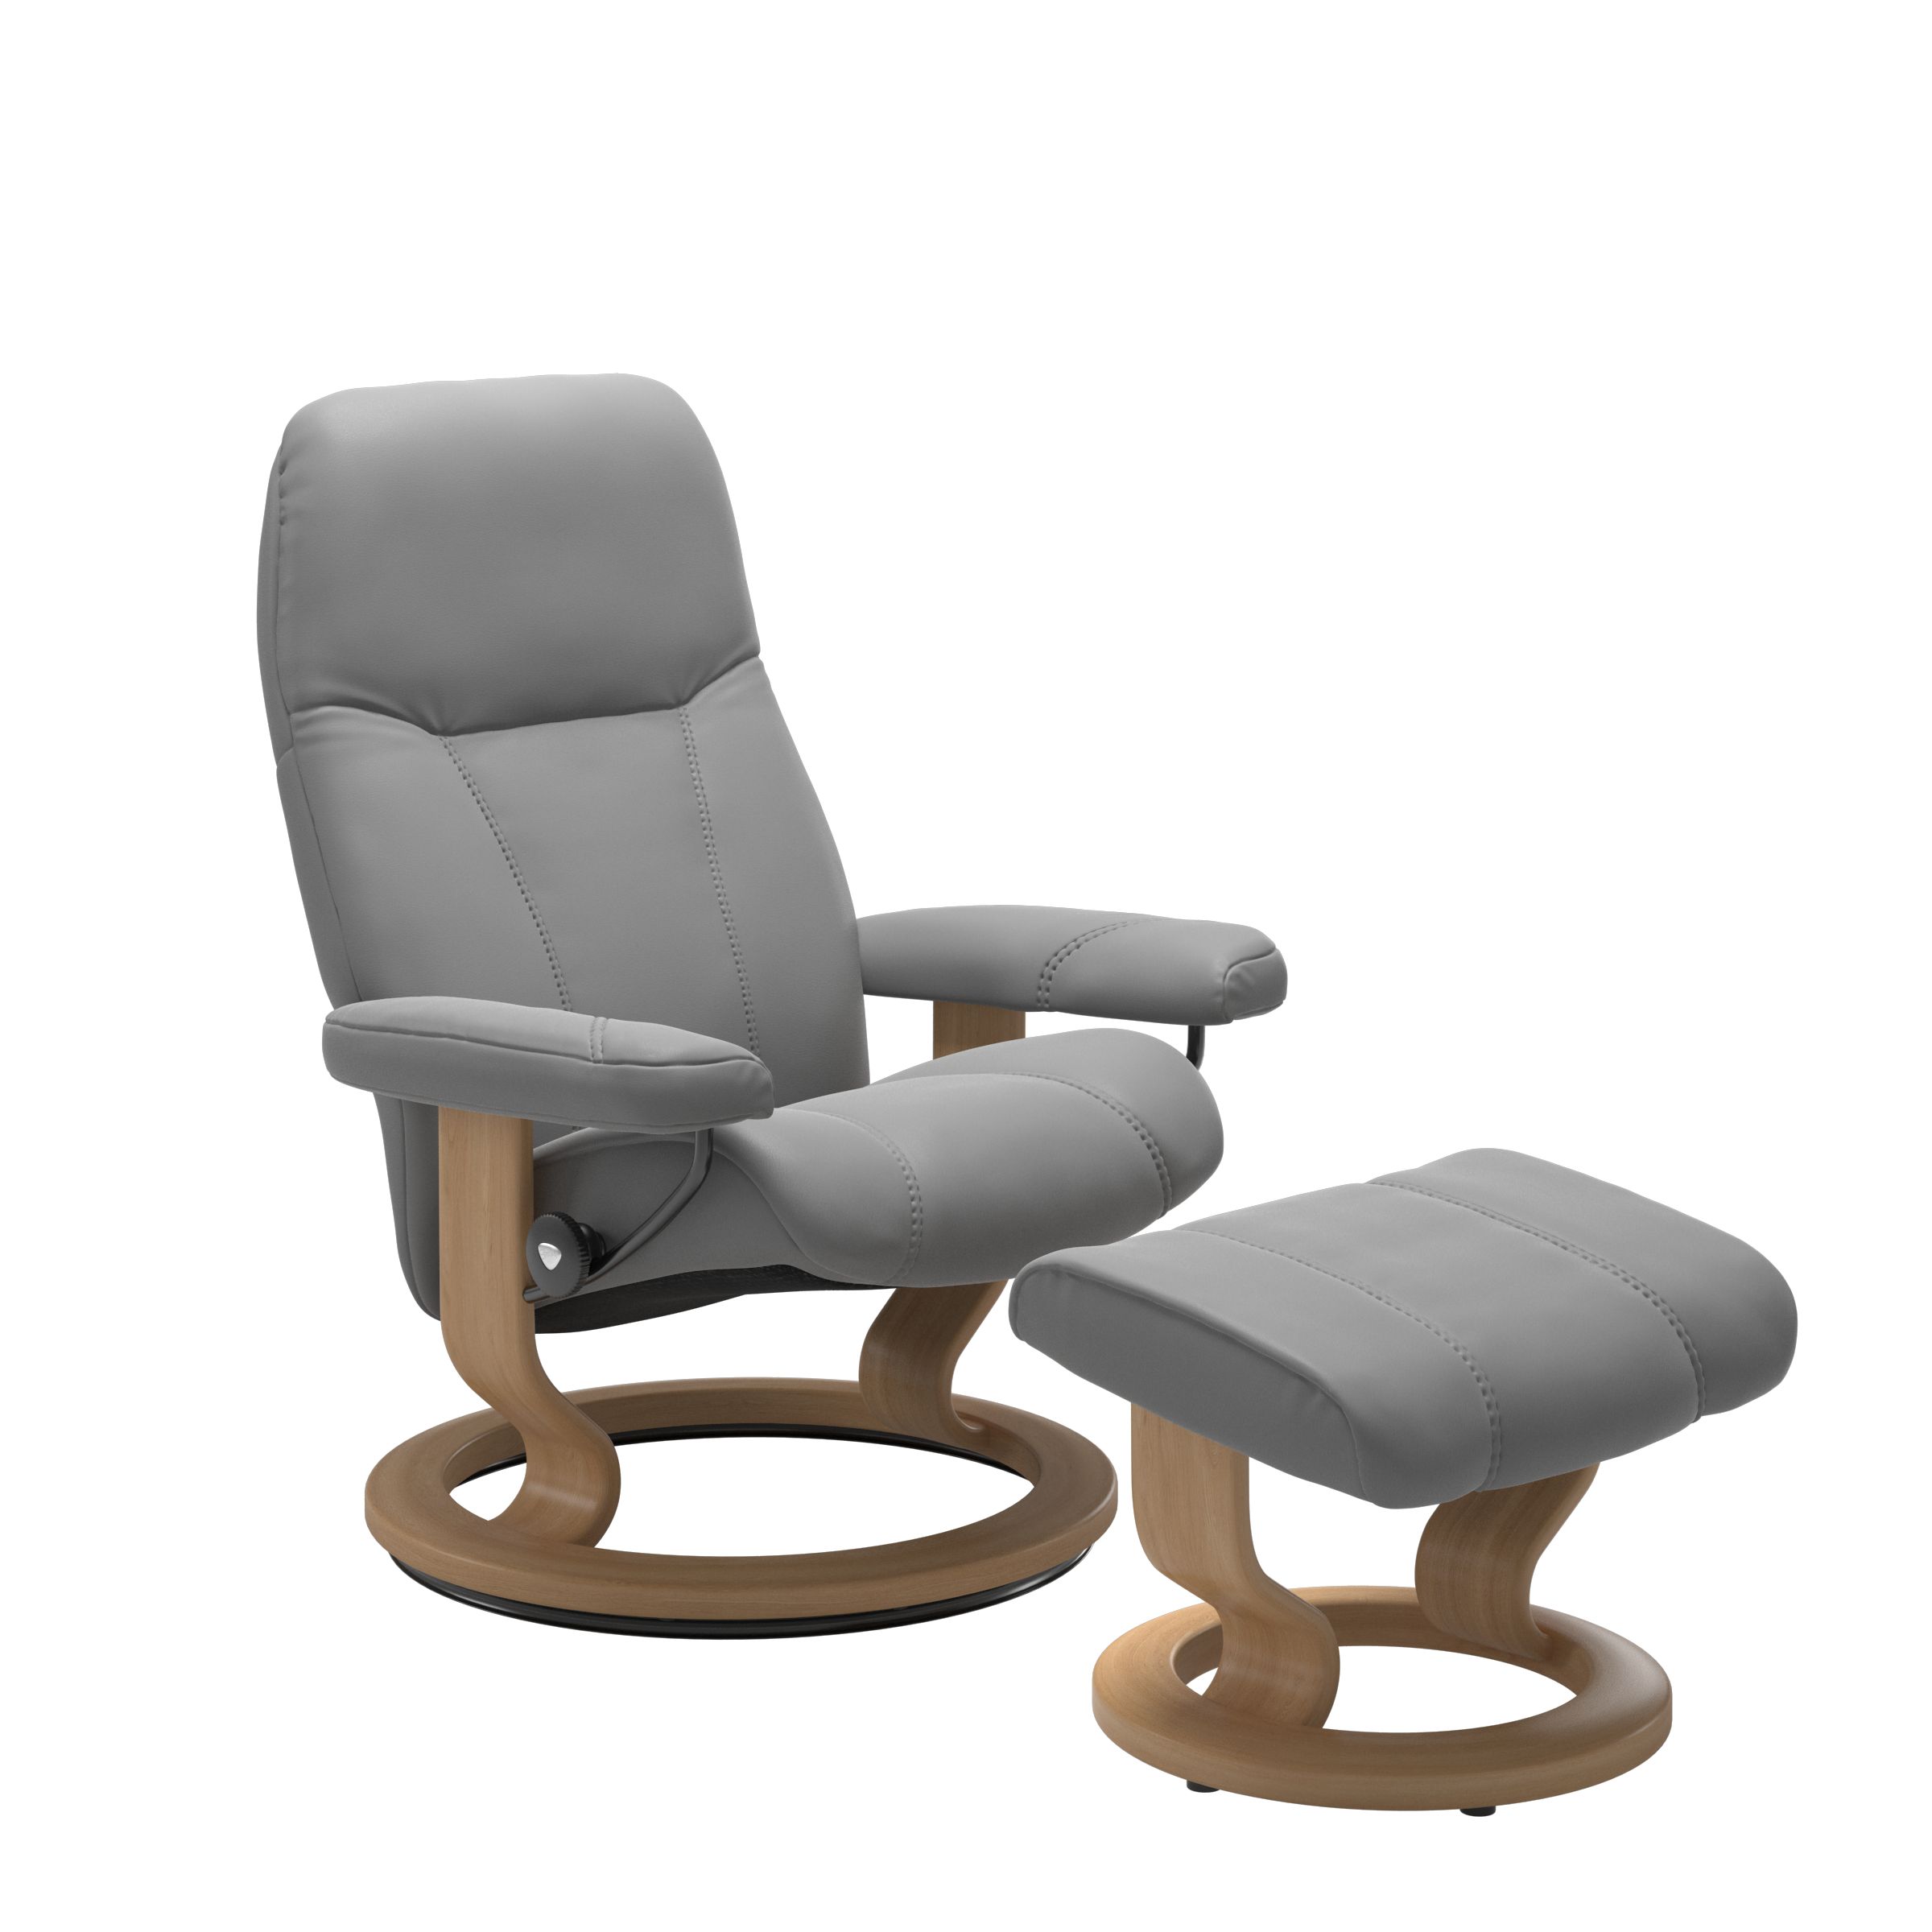 Stressless Consul Wild Dove Large Recliner Chair